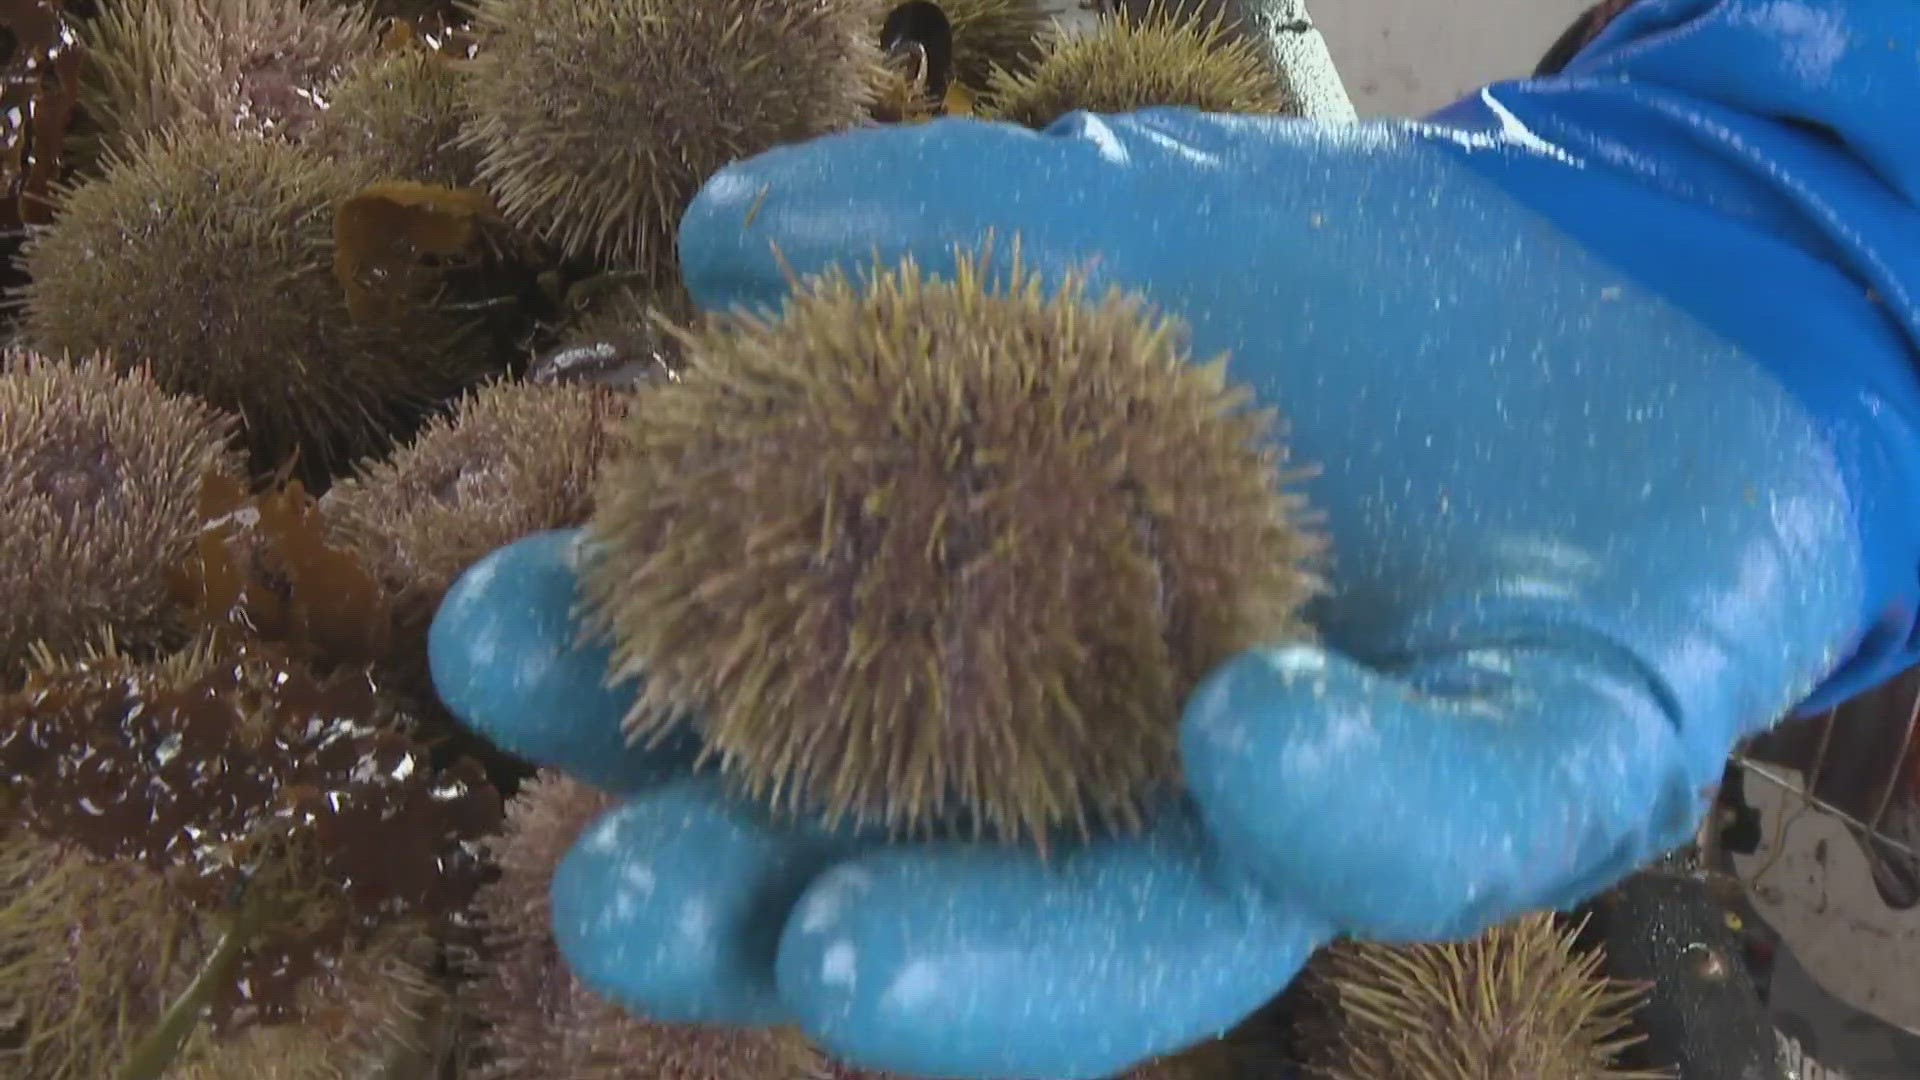 In the '90s Maine sea urchin value was second to lobster. Then they vanished. Now those who still hold their licenses fear they're the last of a generation.